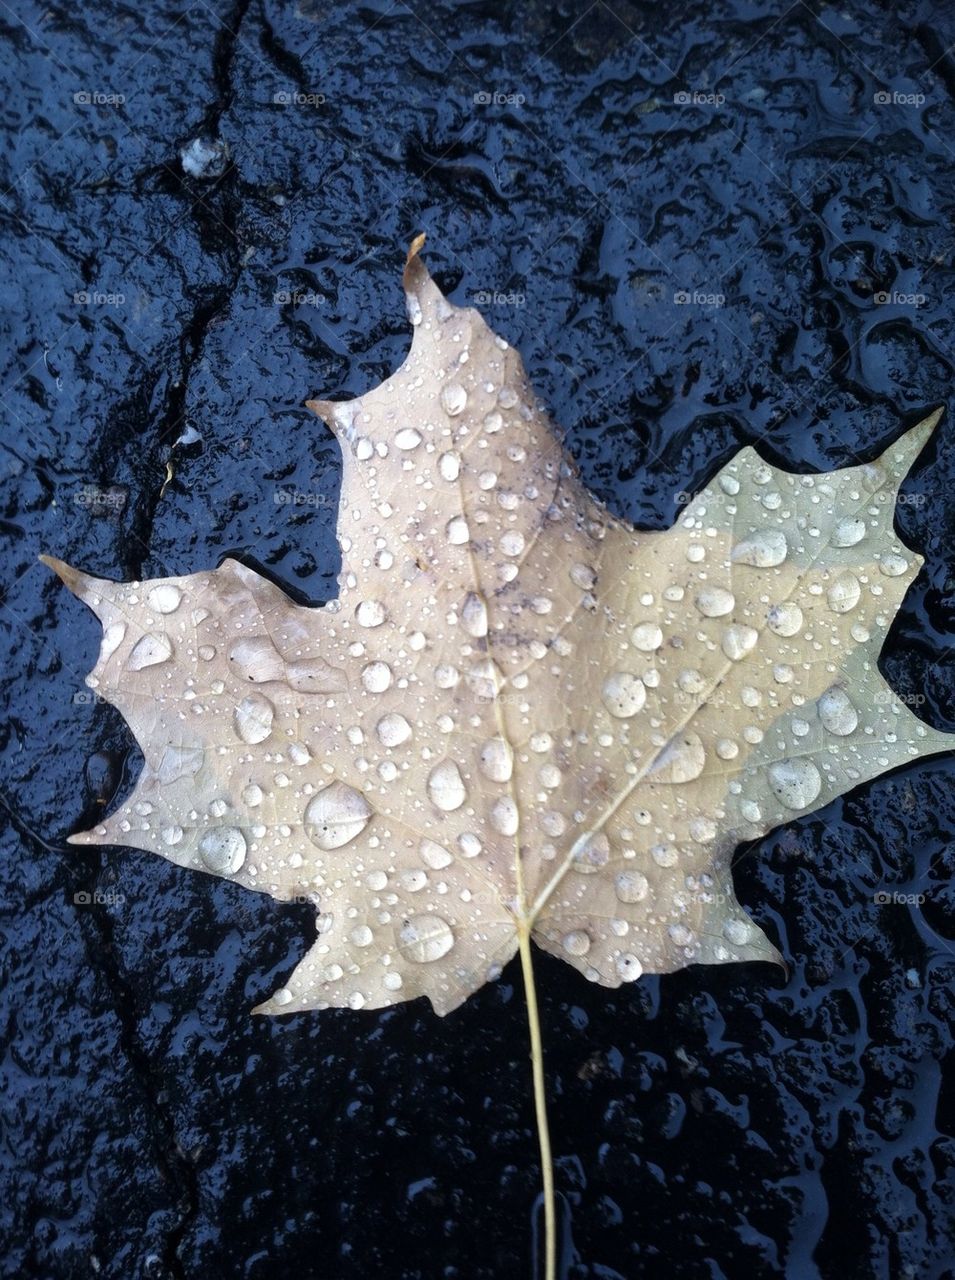 Raindrops on a leaf on the ground in the parking lot